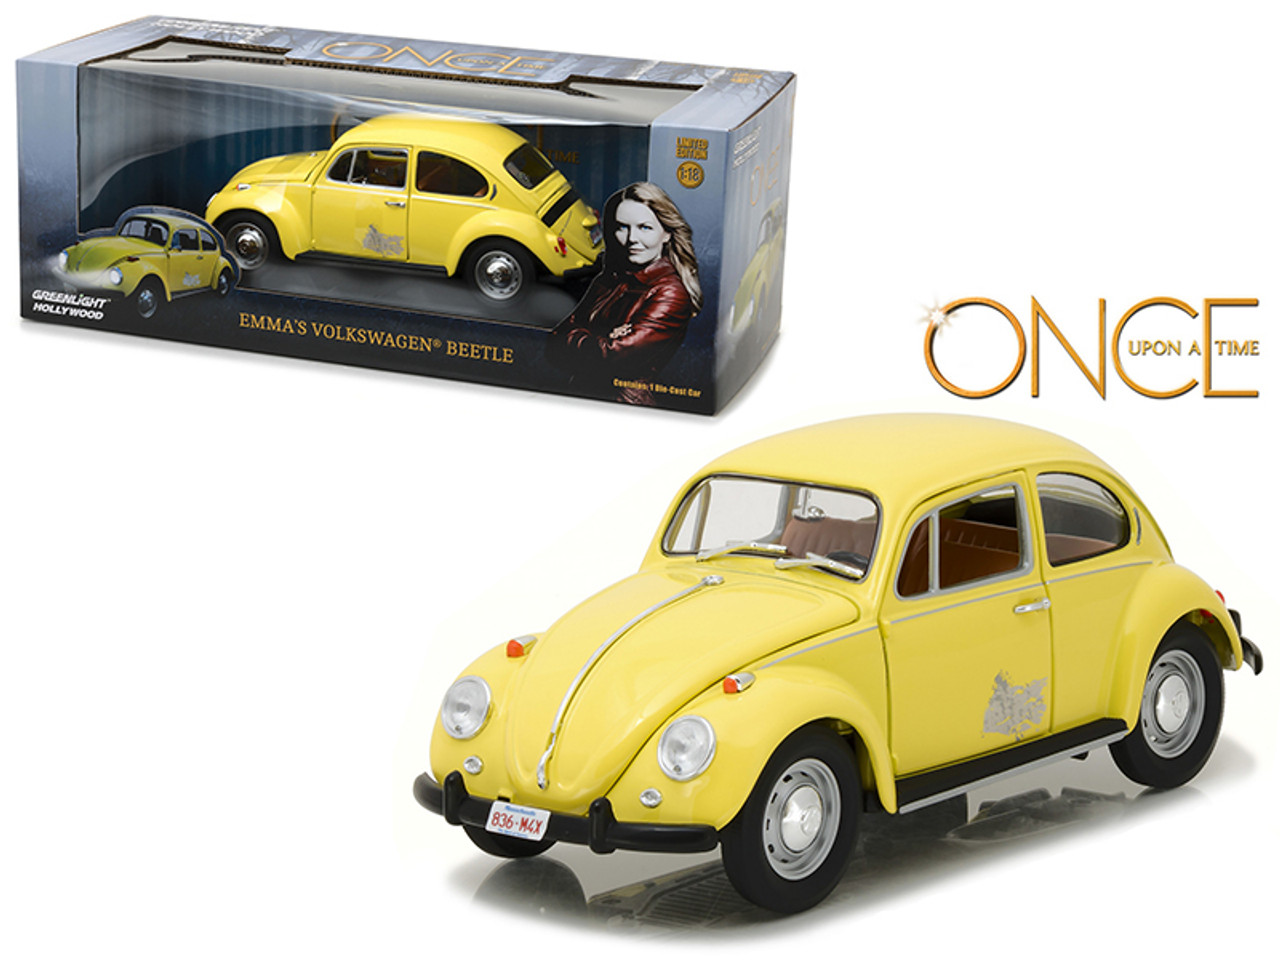 Emma's Volkswagen Beetle Yellow "Once Upon a Time" TV Series (2010-Current) 1/18 Diecast Model Car by Greenlight